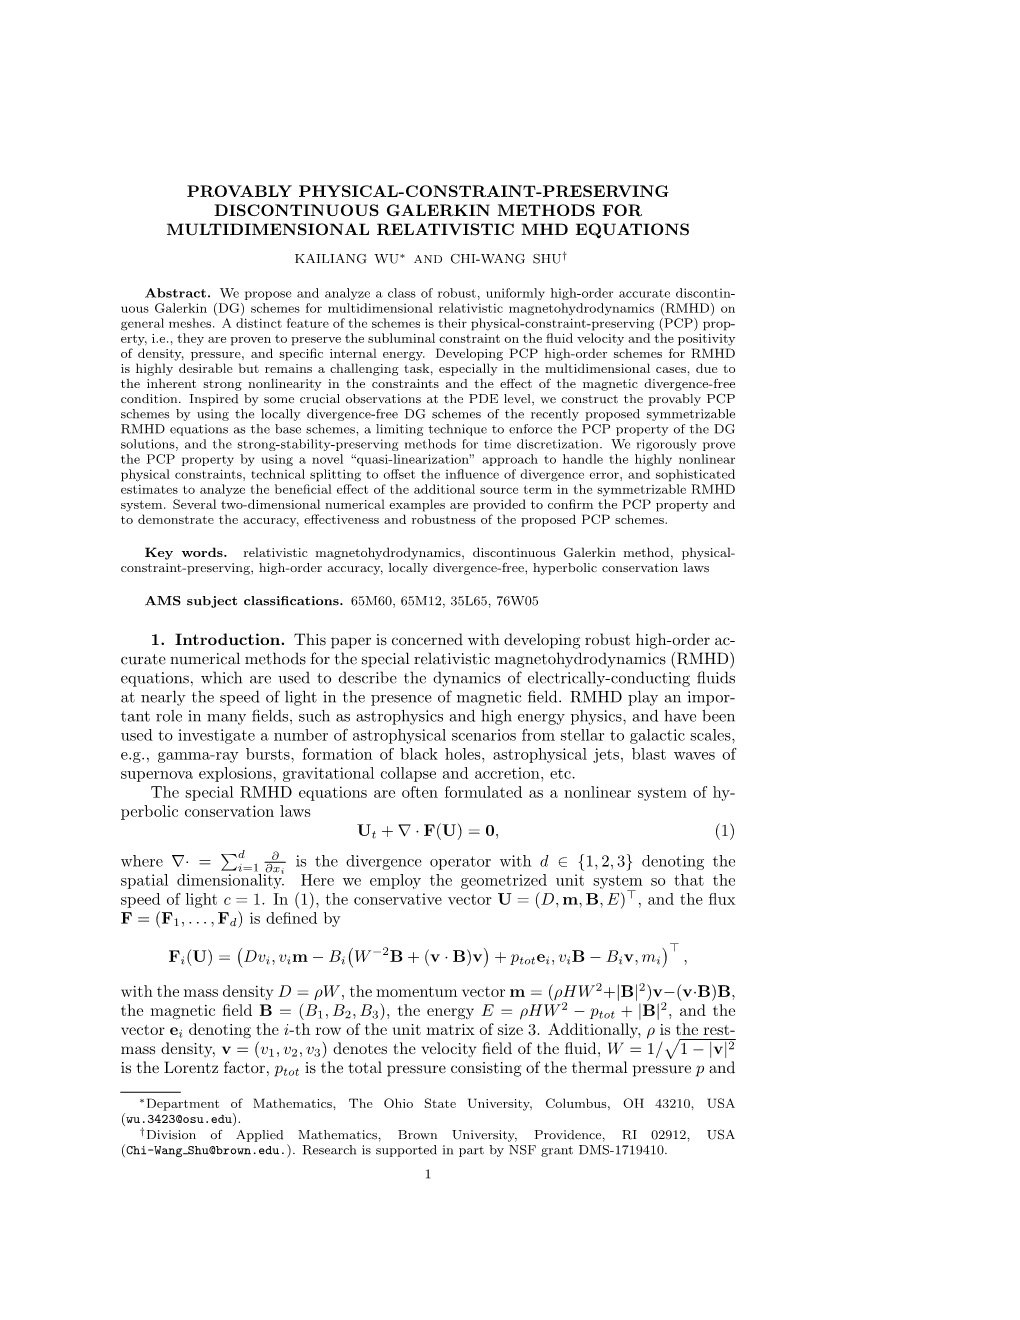 Provably Physical-Constraint-Preserving Discontinuous Galerkin Methods for Multidimensional Relativistic Mhd Equations